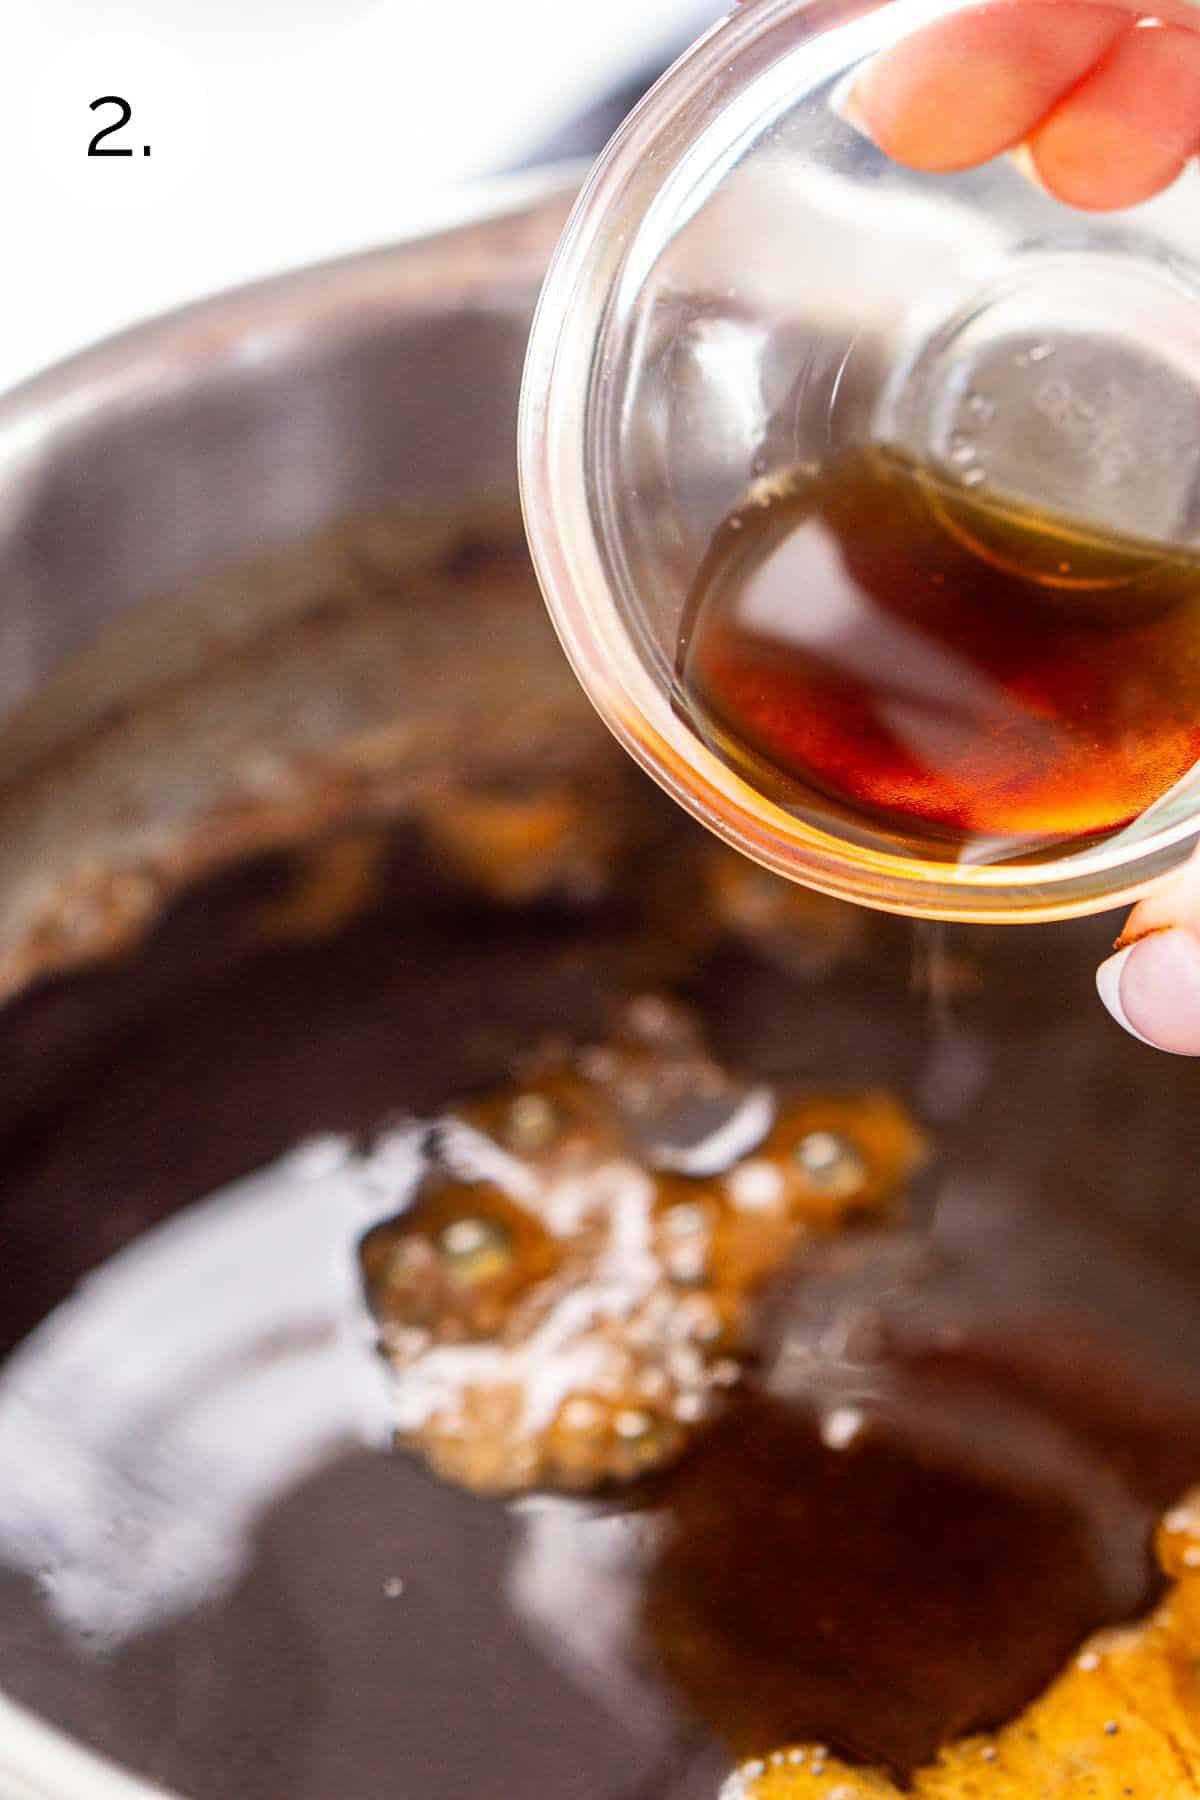 A hand pouring a small bowl of vanilla extract into the saucepan after boiling the mixture.